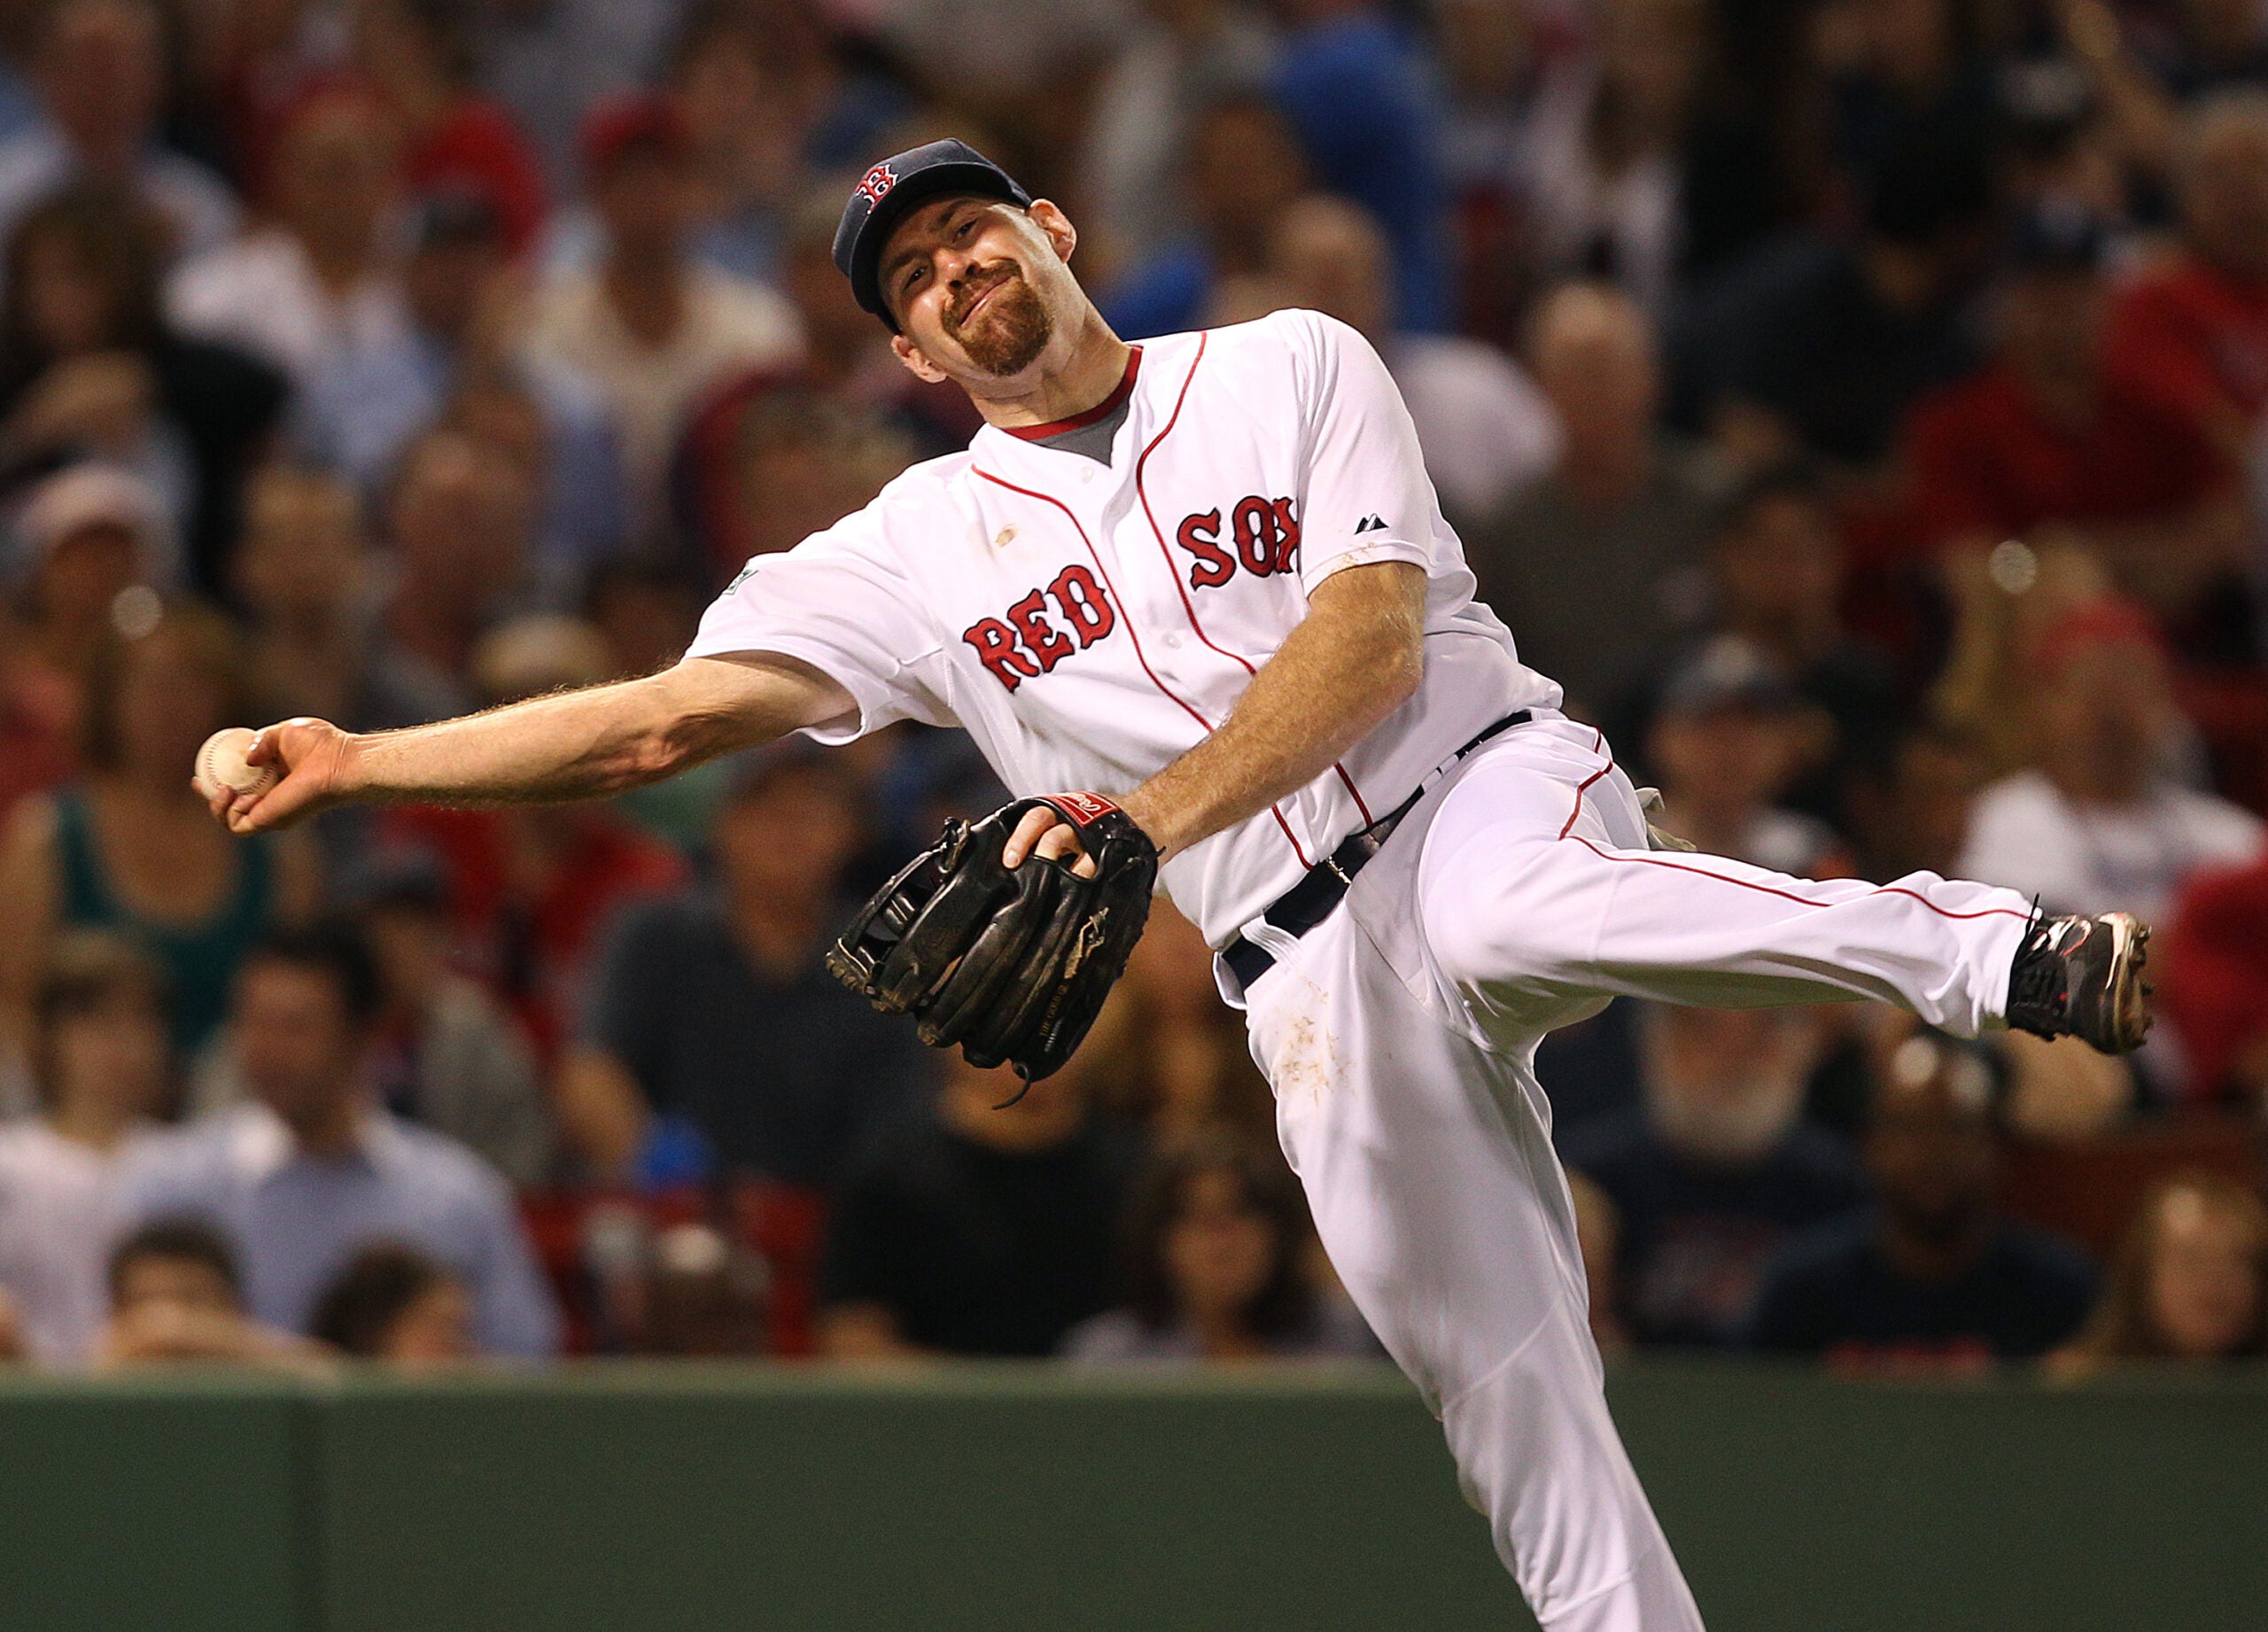 Report: NESN pursues Kevin Youkilis, others to replace Jerry Remy